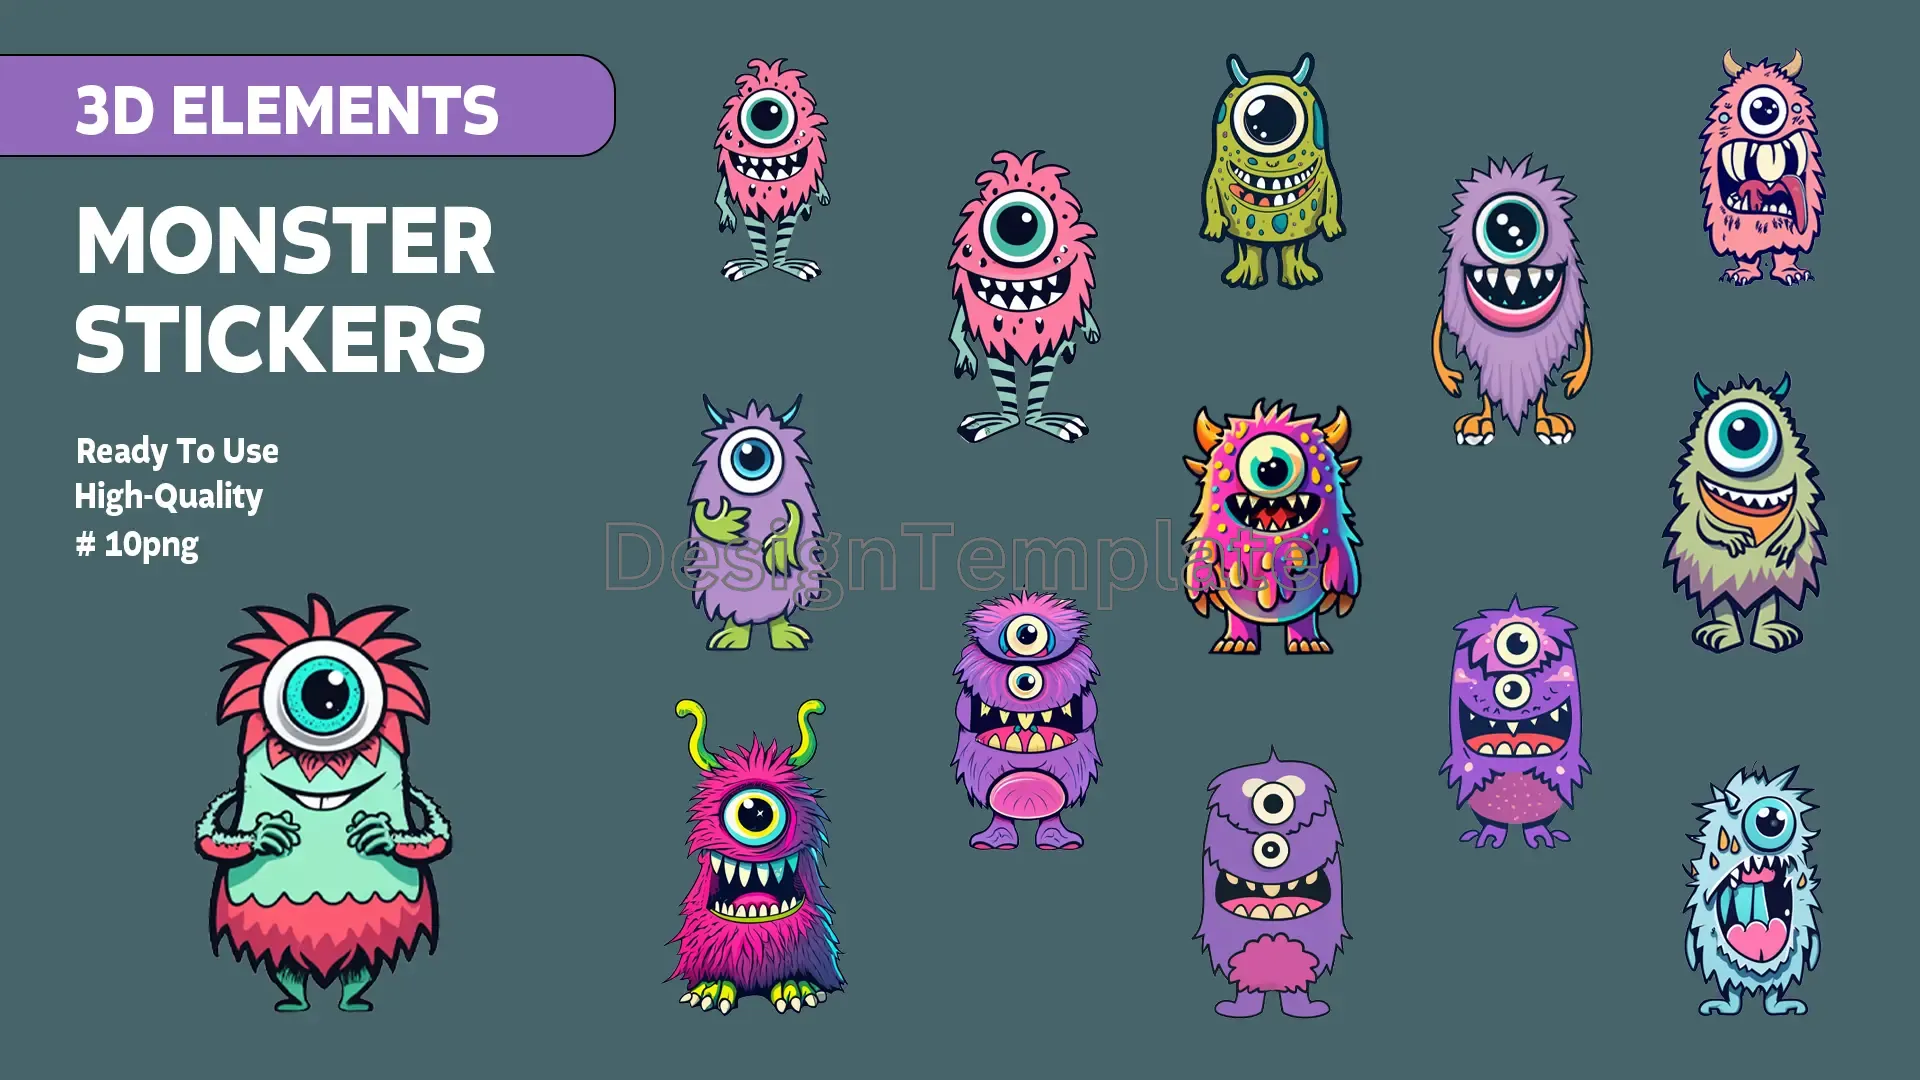 Beastly Stickers 3D Monster Elements Graphics Collection